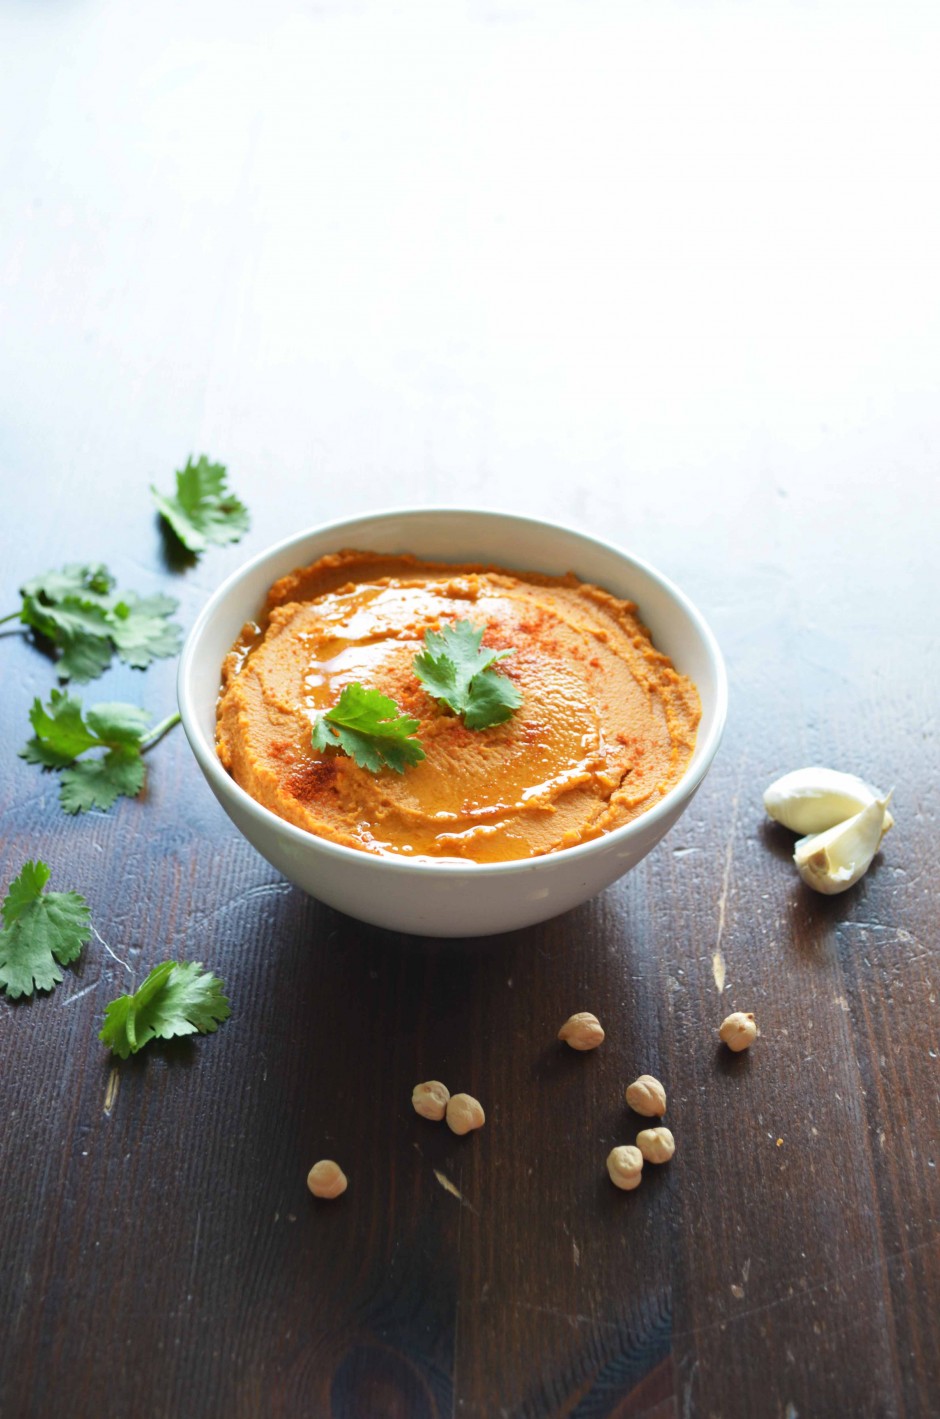 A white bowl filled with grilled red pepper (paprika) hummus, topped with cilantro. Recipe and photo by That Healthy Kitchen